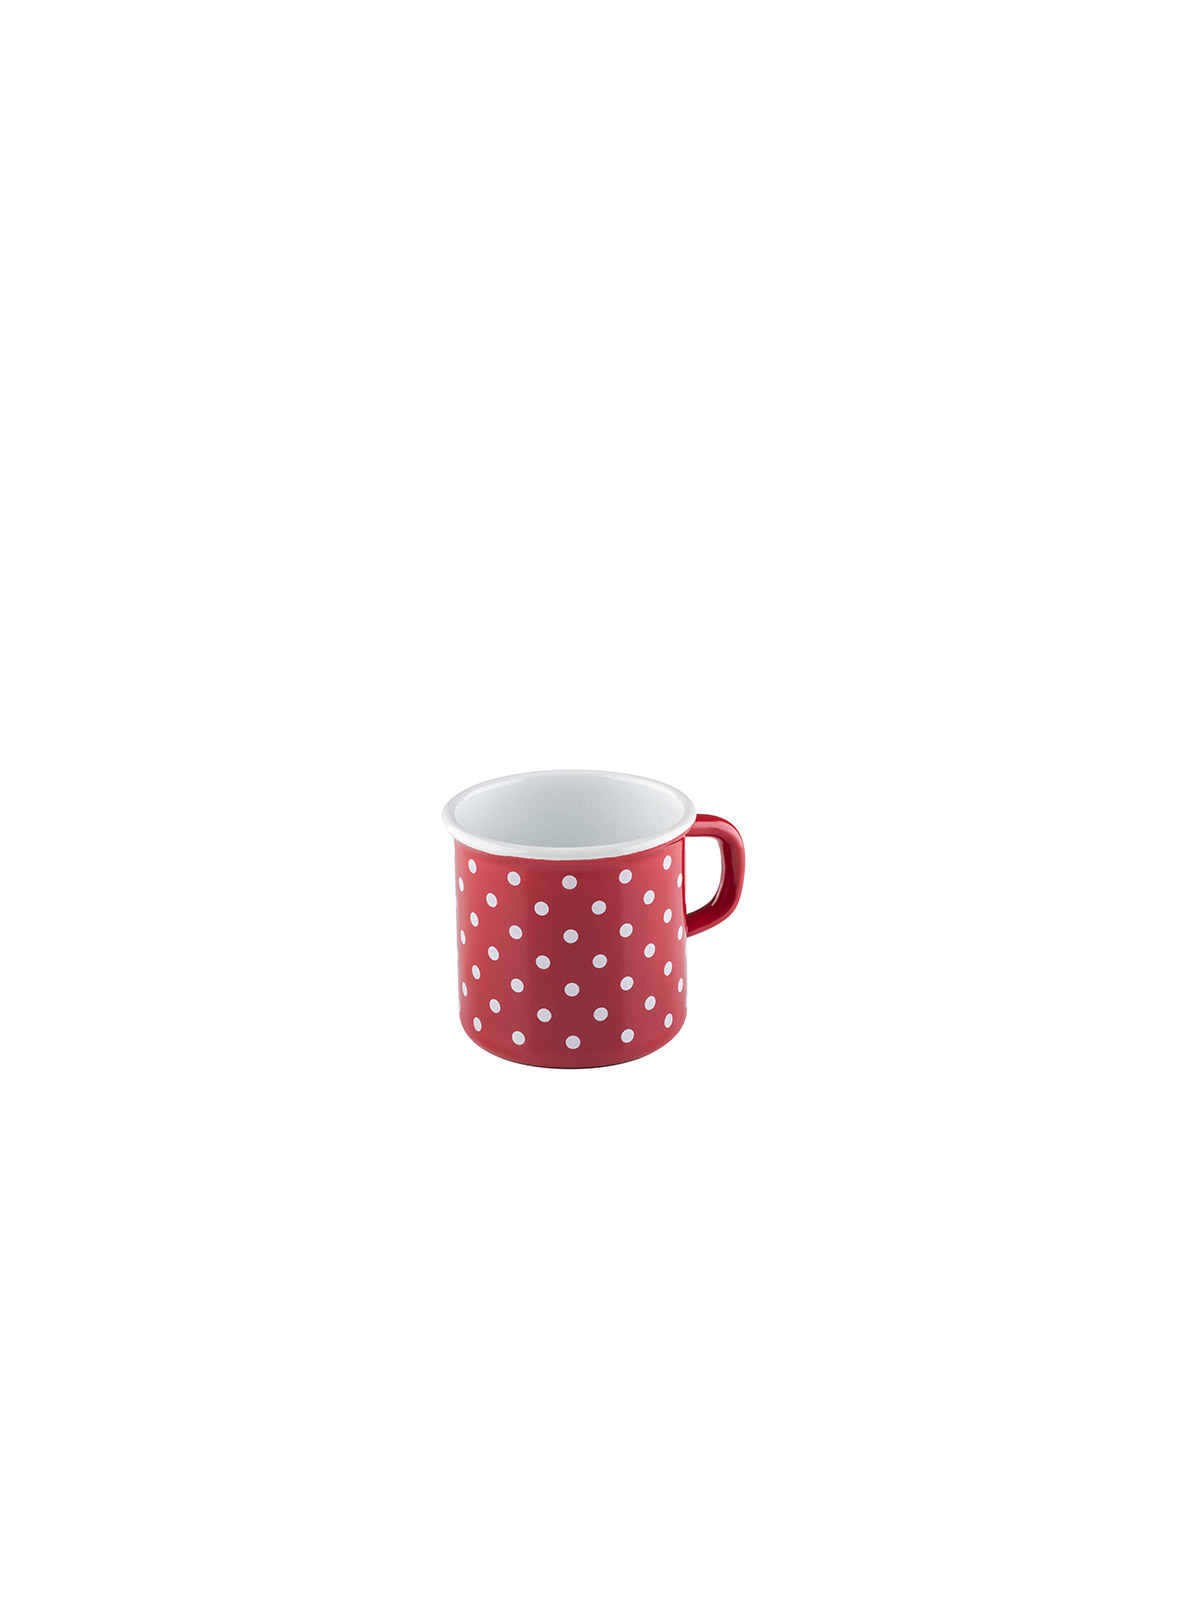 cup red with dots (0221-77)